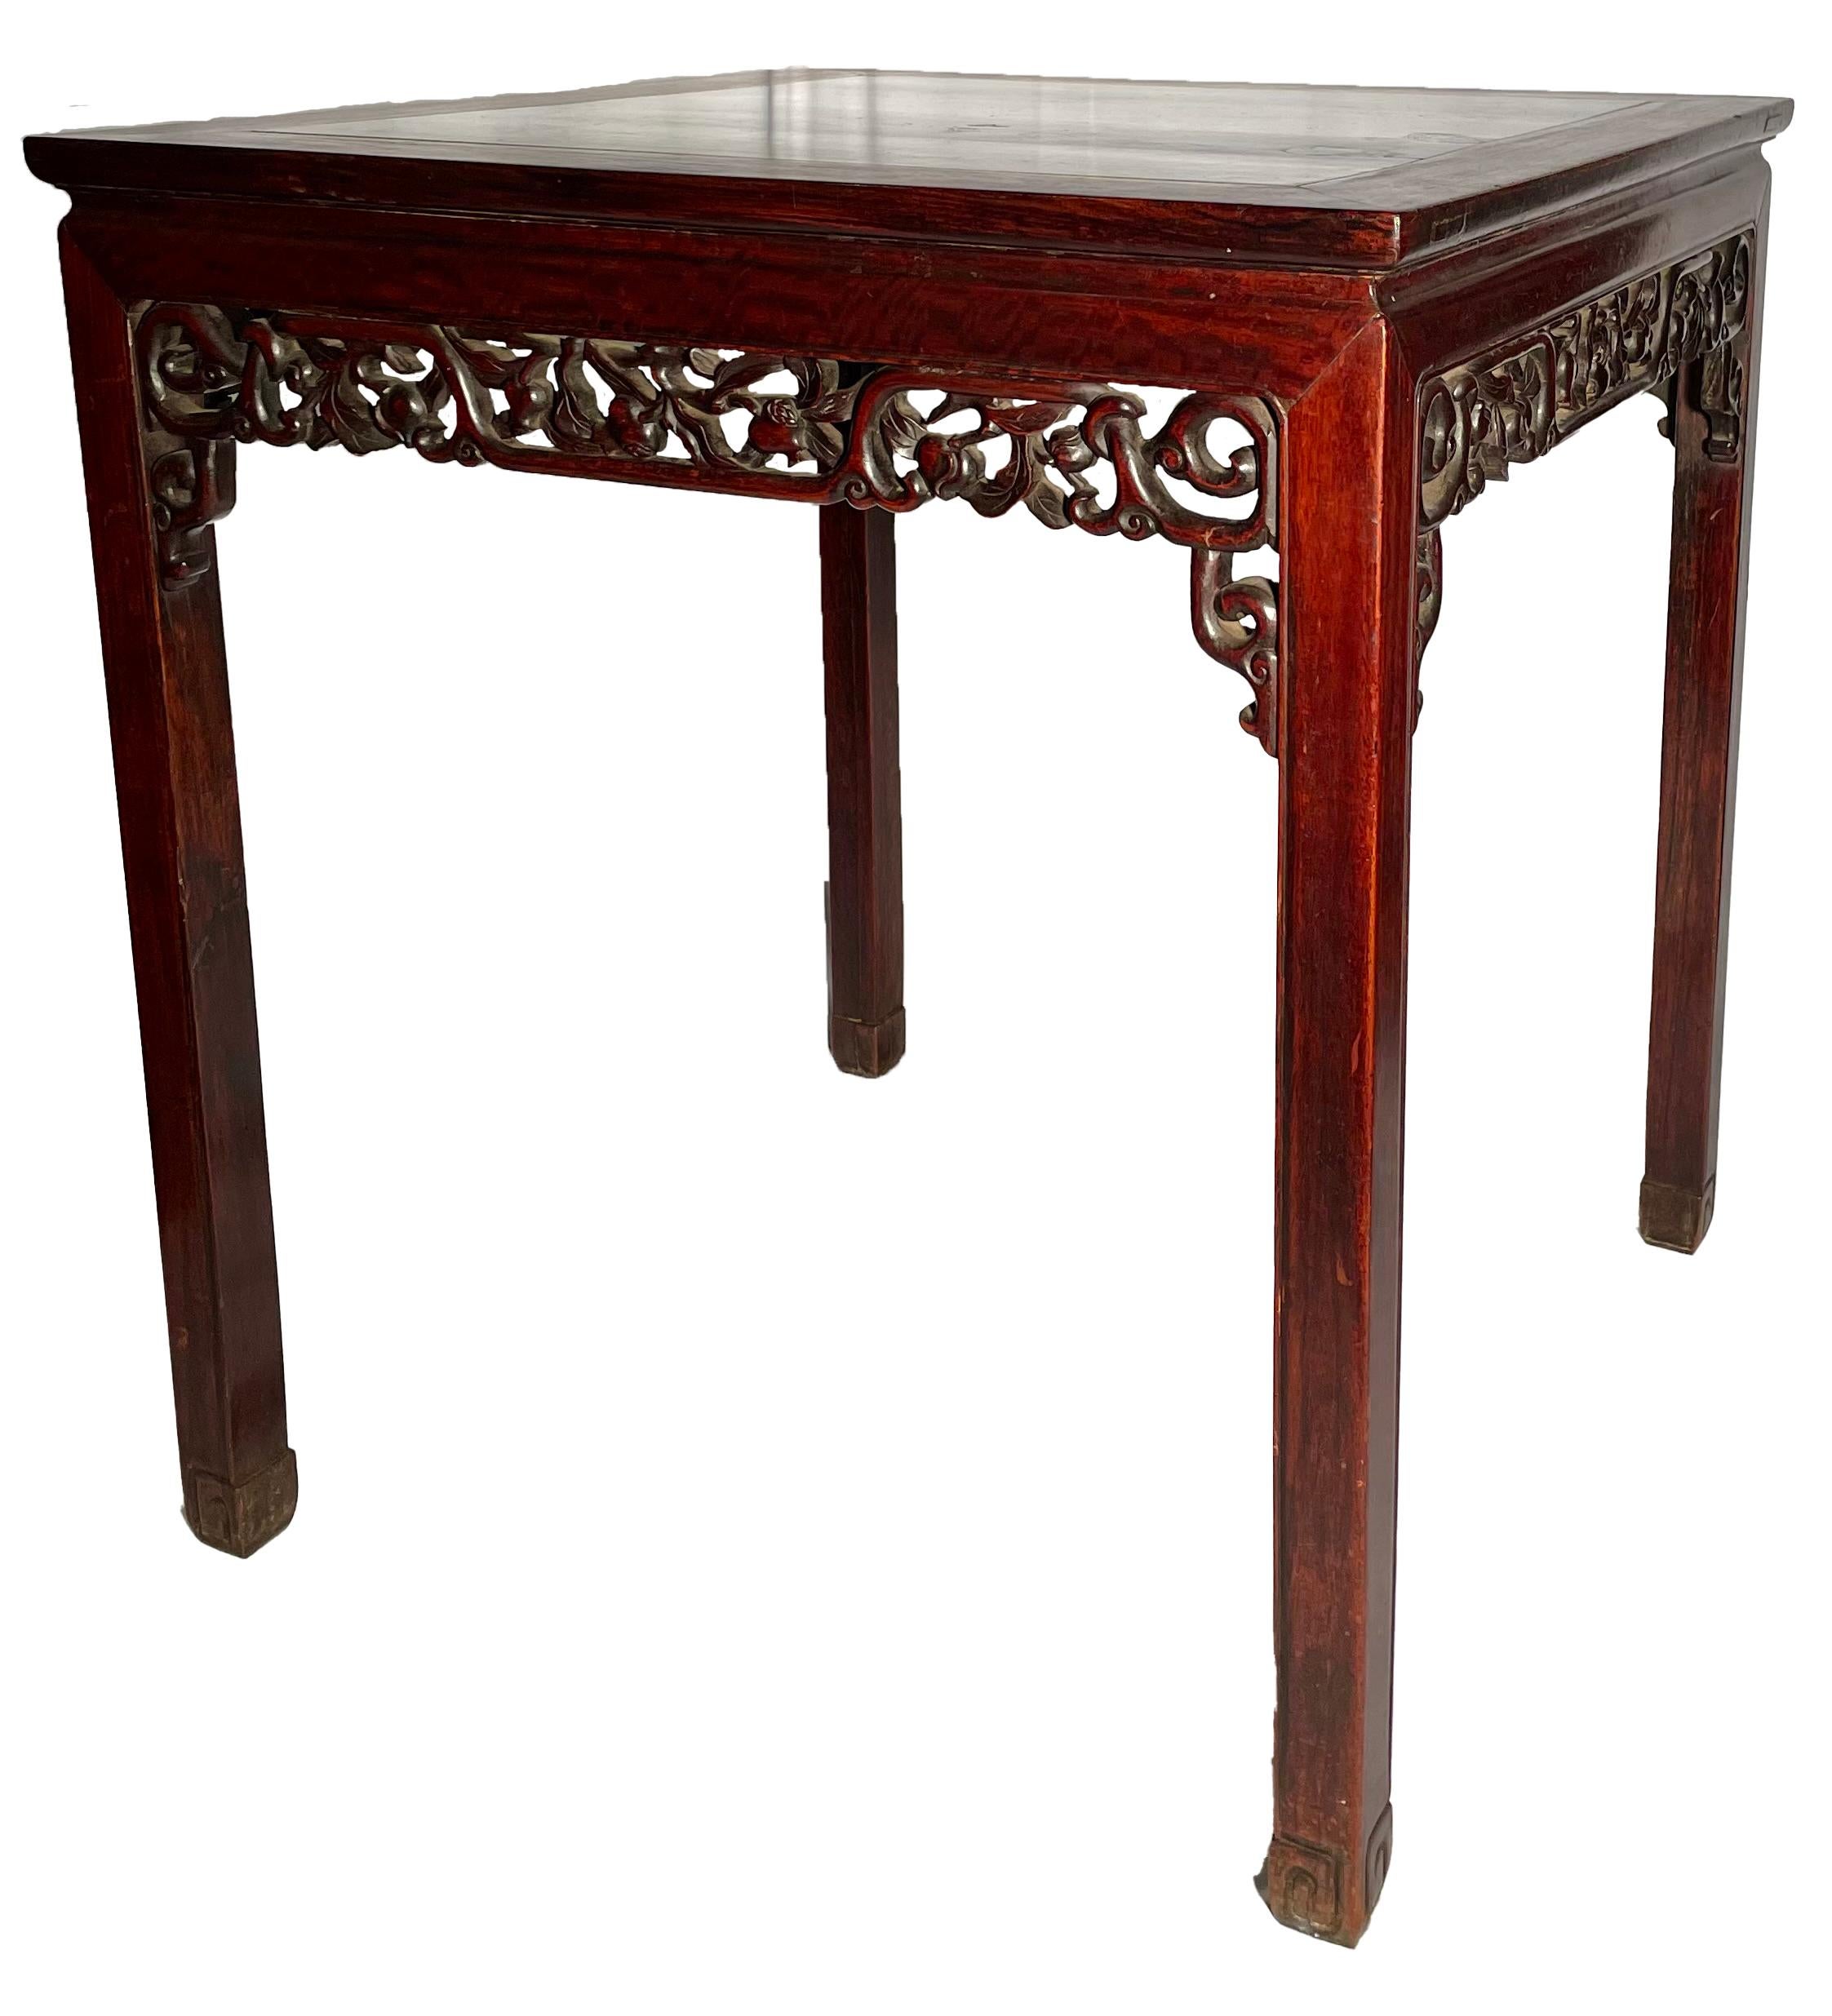 Antique Late 19th Century Chinese Marble-Top Teakwood Table, Circa 1890's. For Sale 4